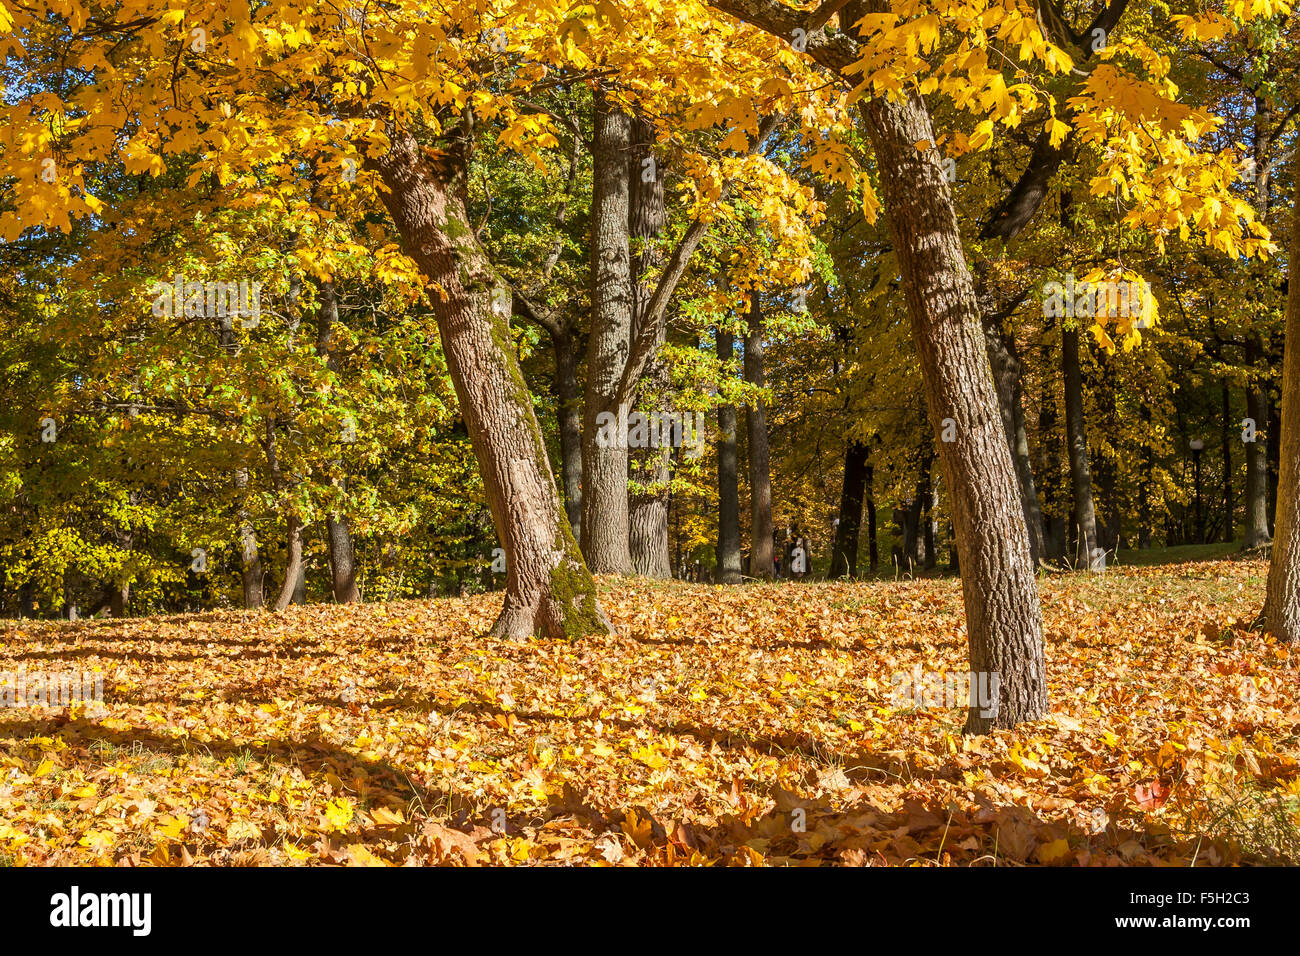 Leaves Falling From An Autumn Maple Trees Stock Photo